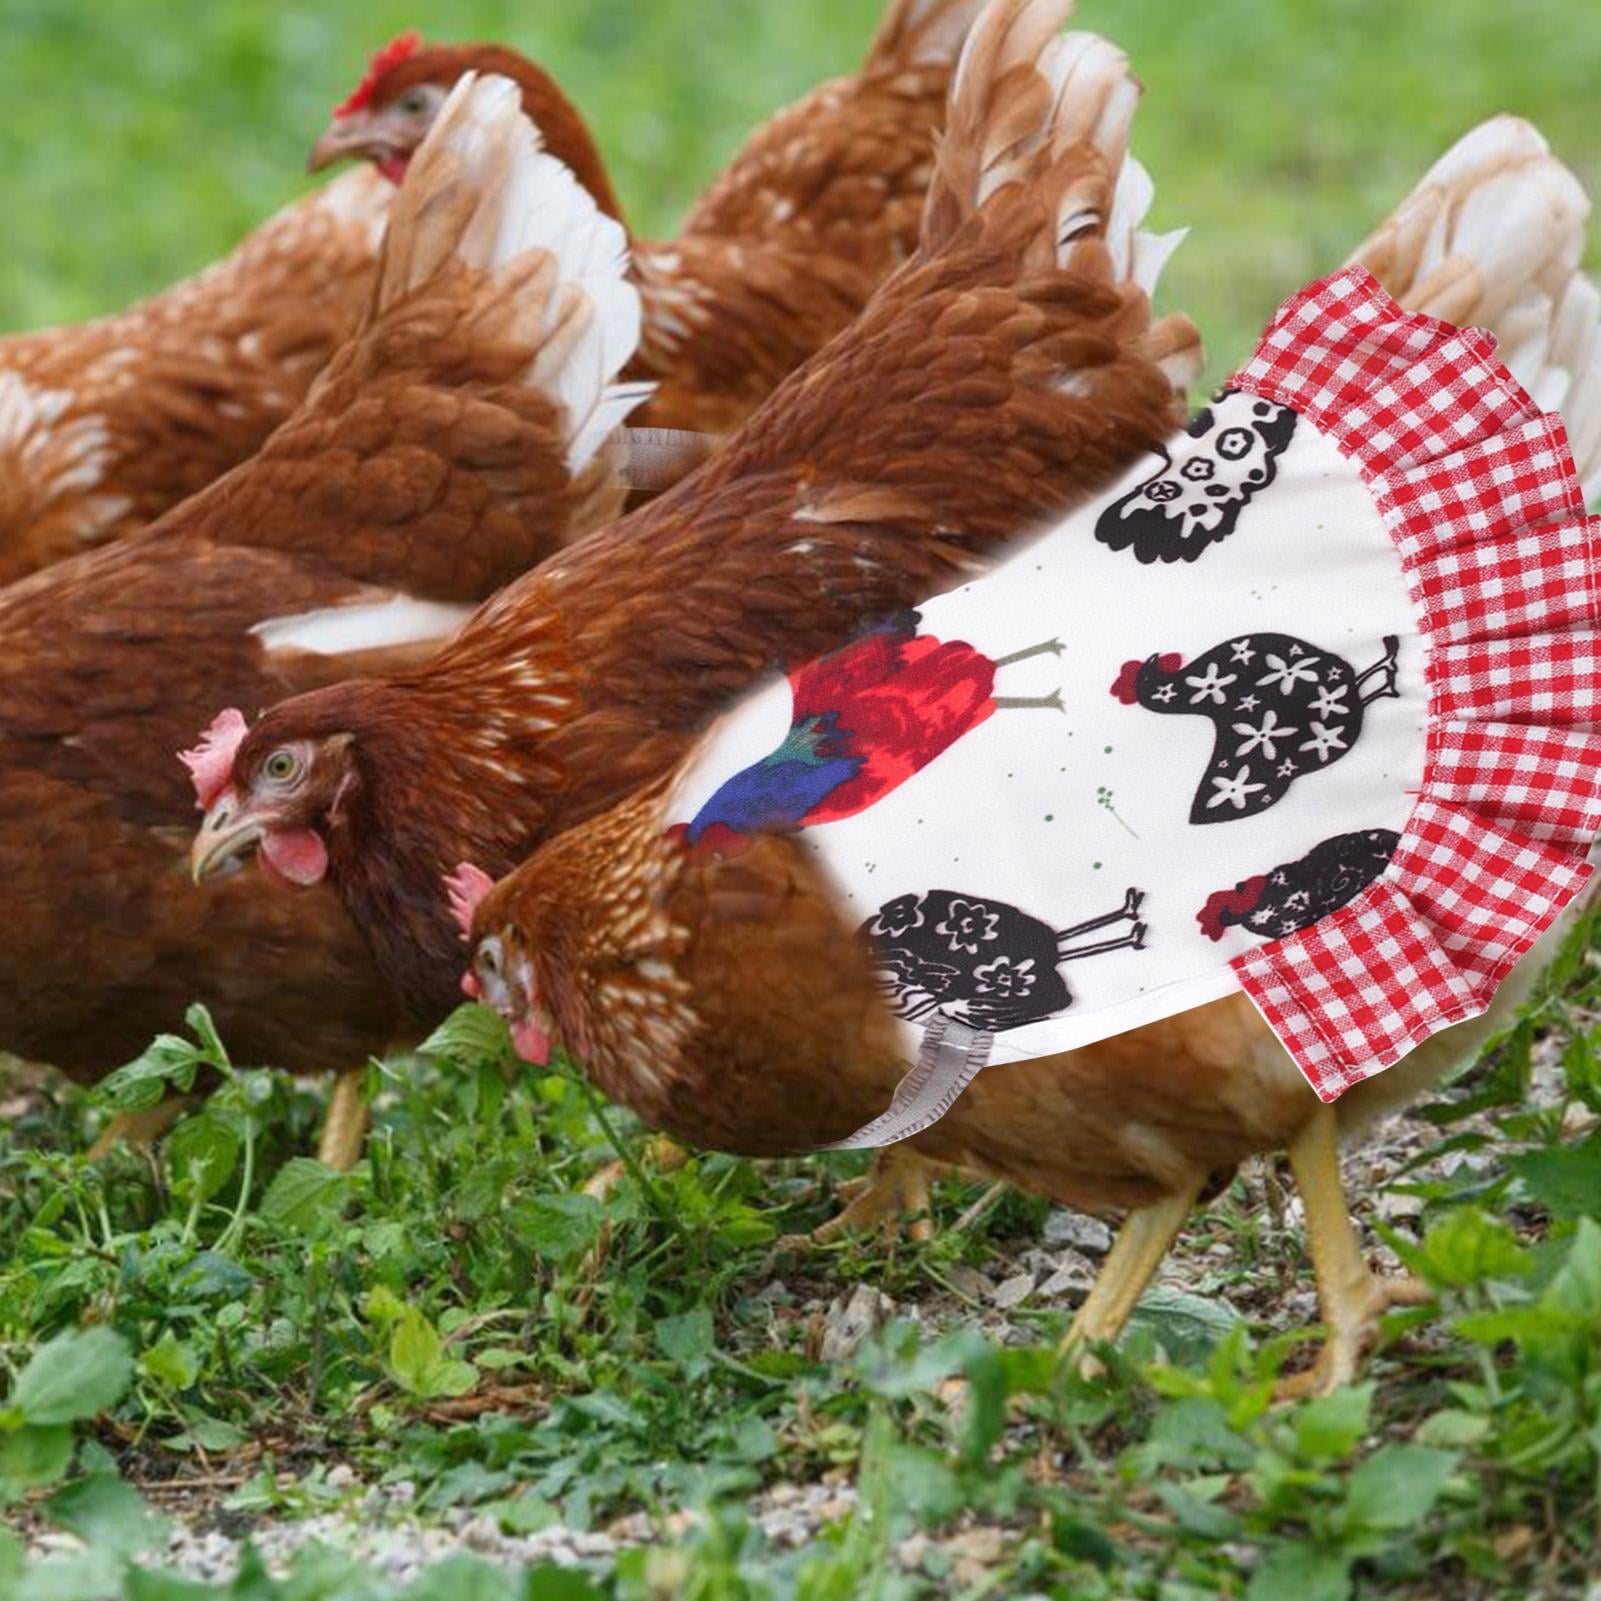 2 SILKIE CHICKEN SADDLE HEN APRON JACKET BACK FEATHER PROTECTION POULTRY USA 